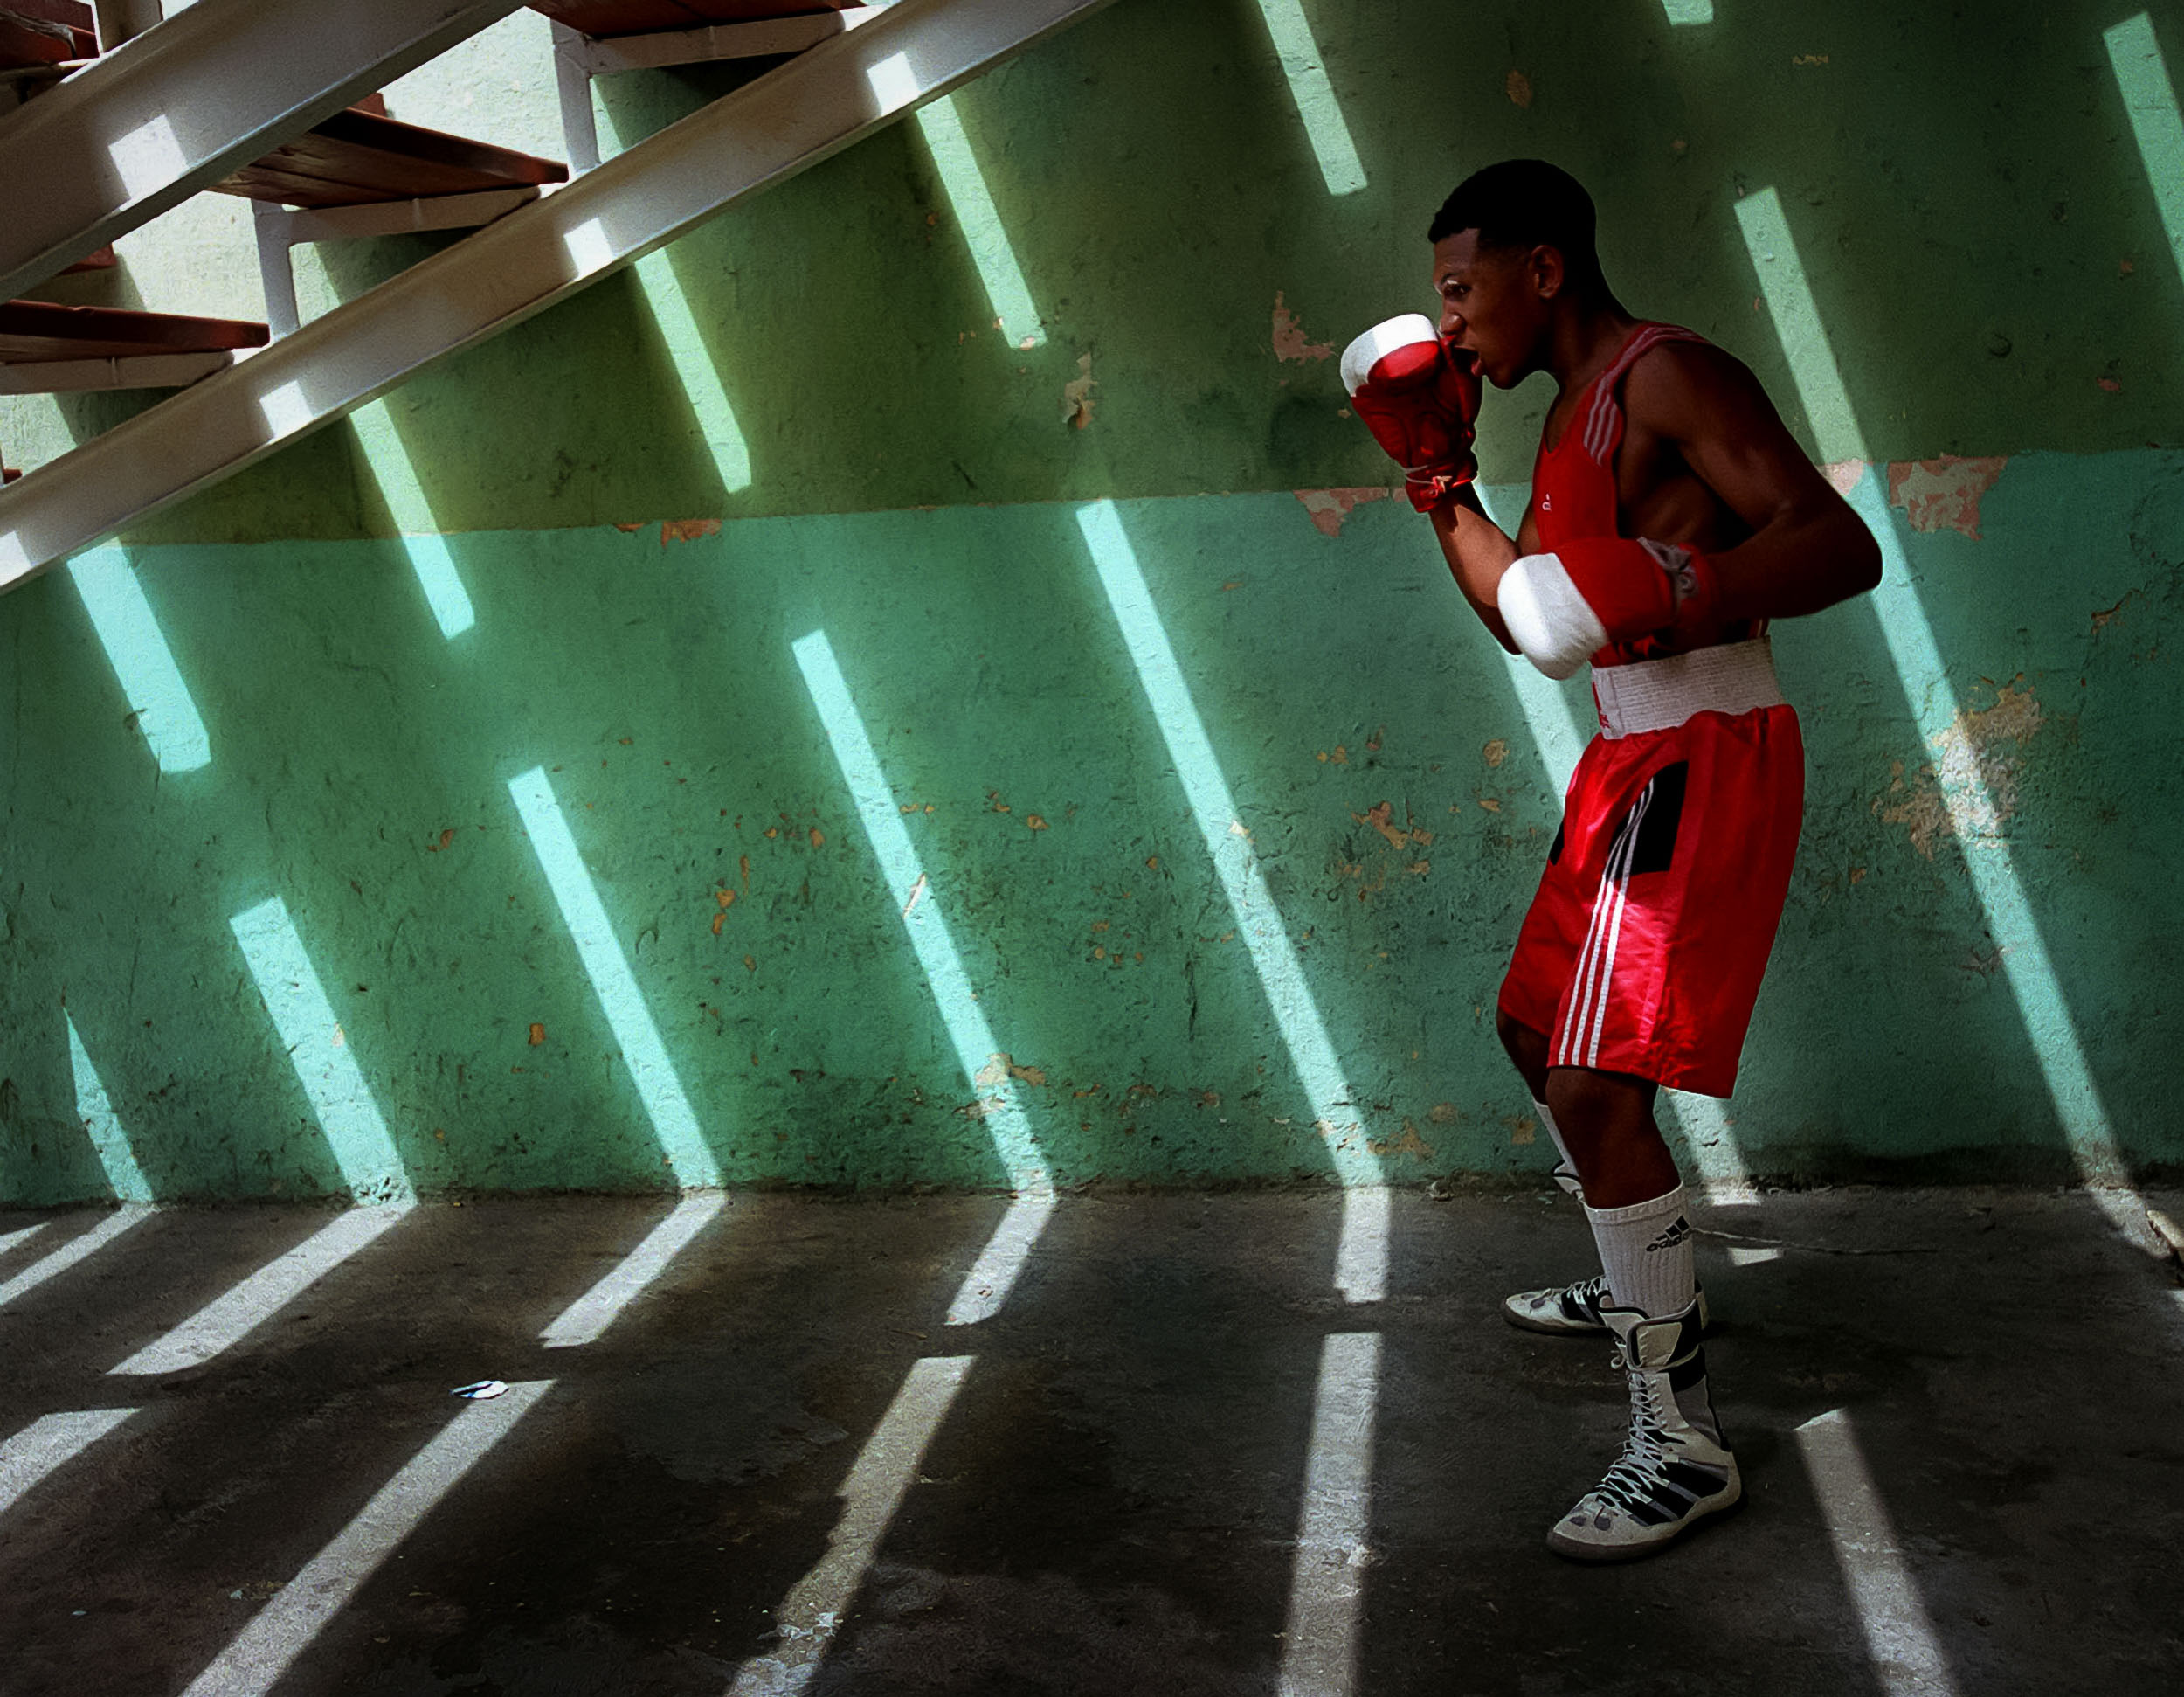 14Overview-Cuba-boxing-gym-under-stands-web.jpg